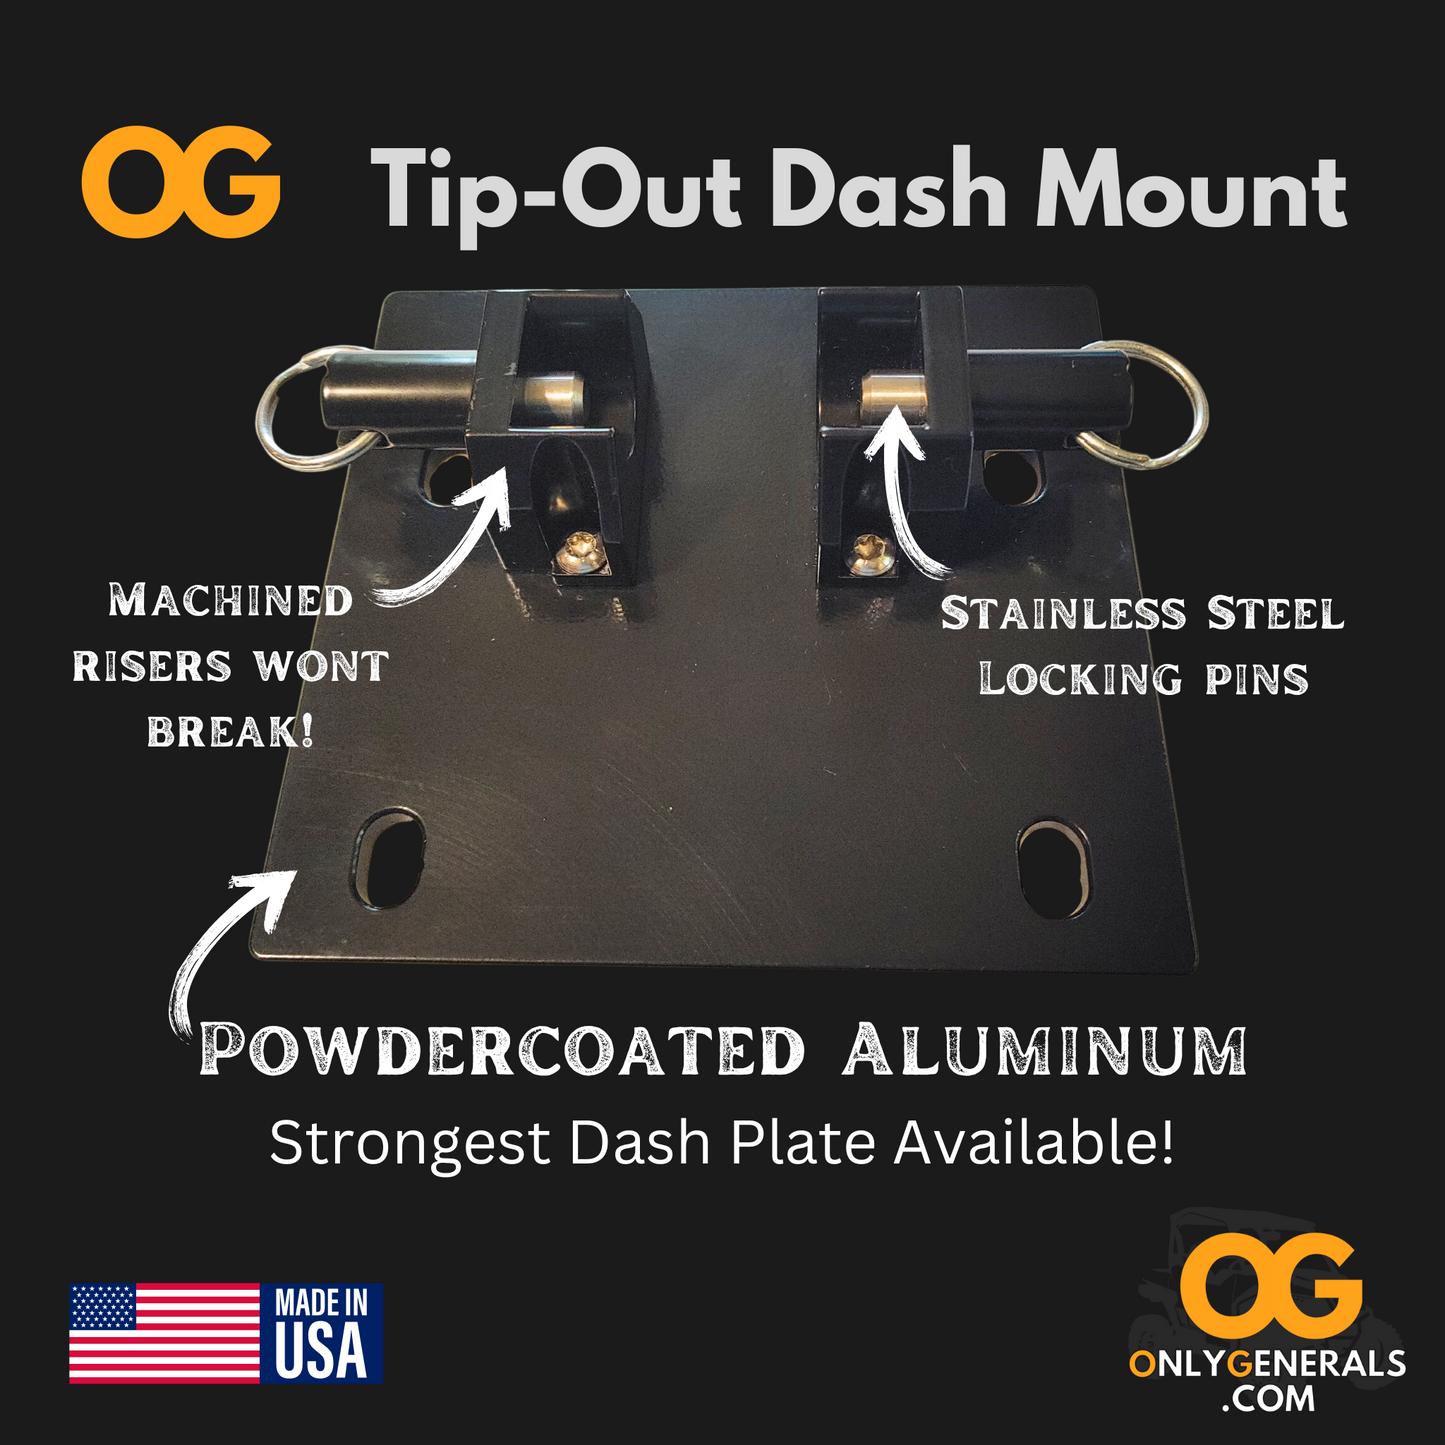 The OnlyGenerals dash mount main product image with text overlay showing the features & design of the base